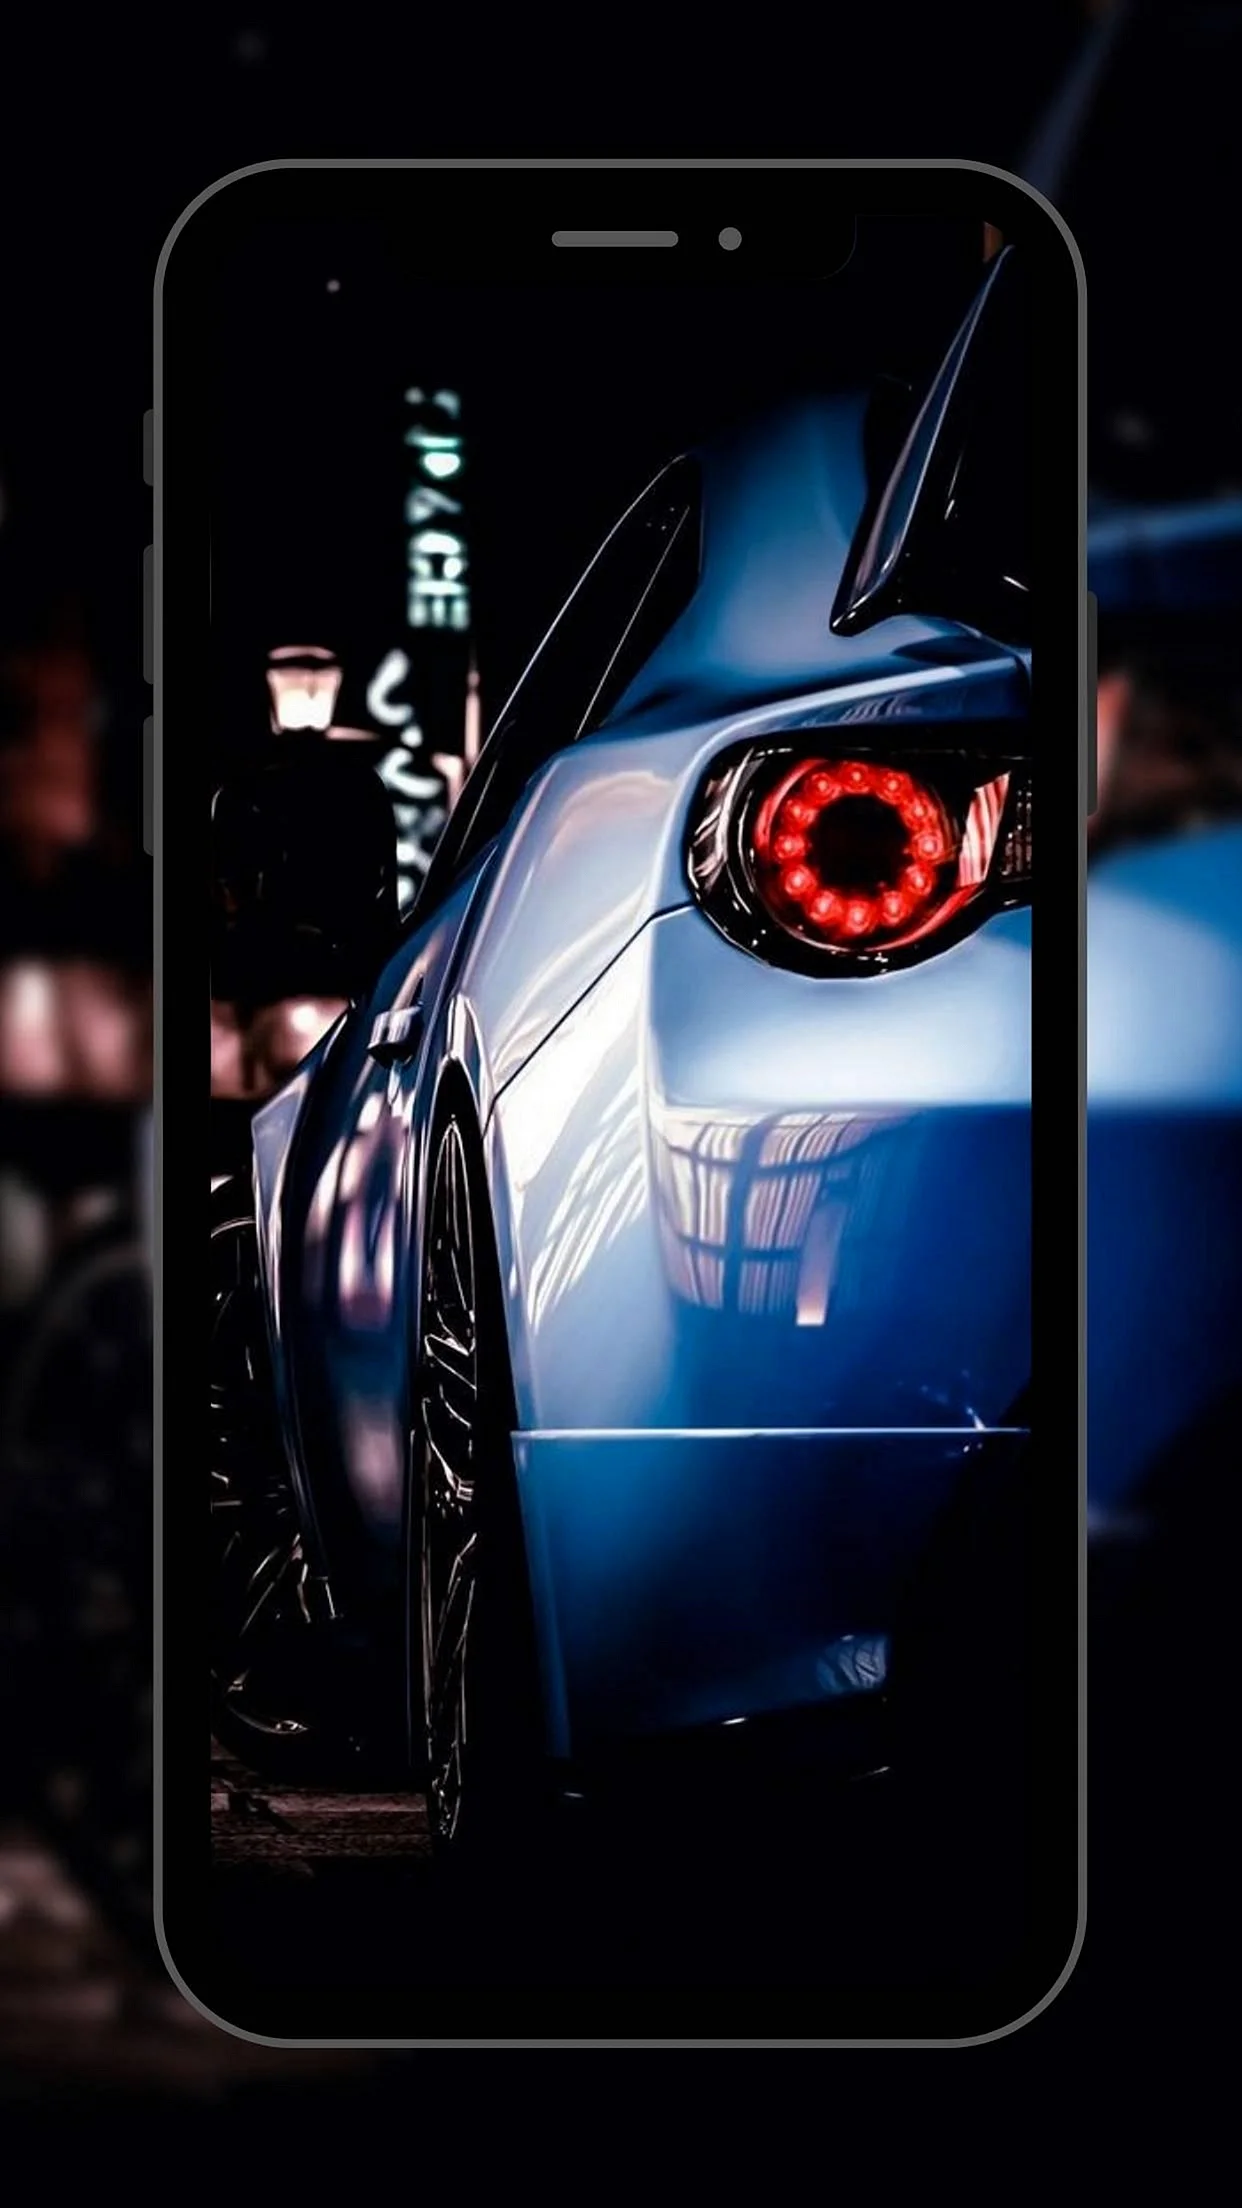 Anime Car Wallpaper For iPhone